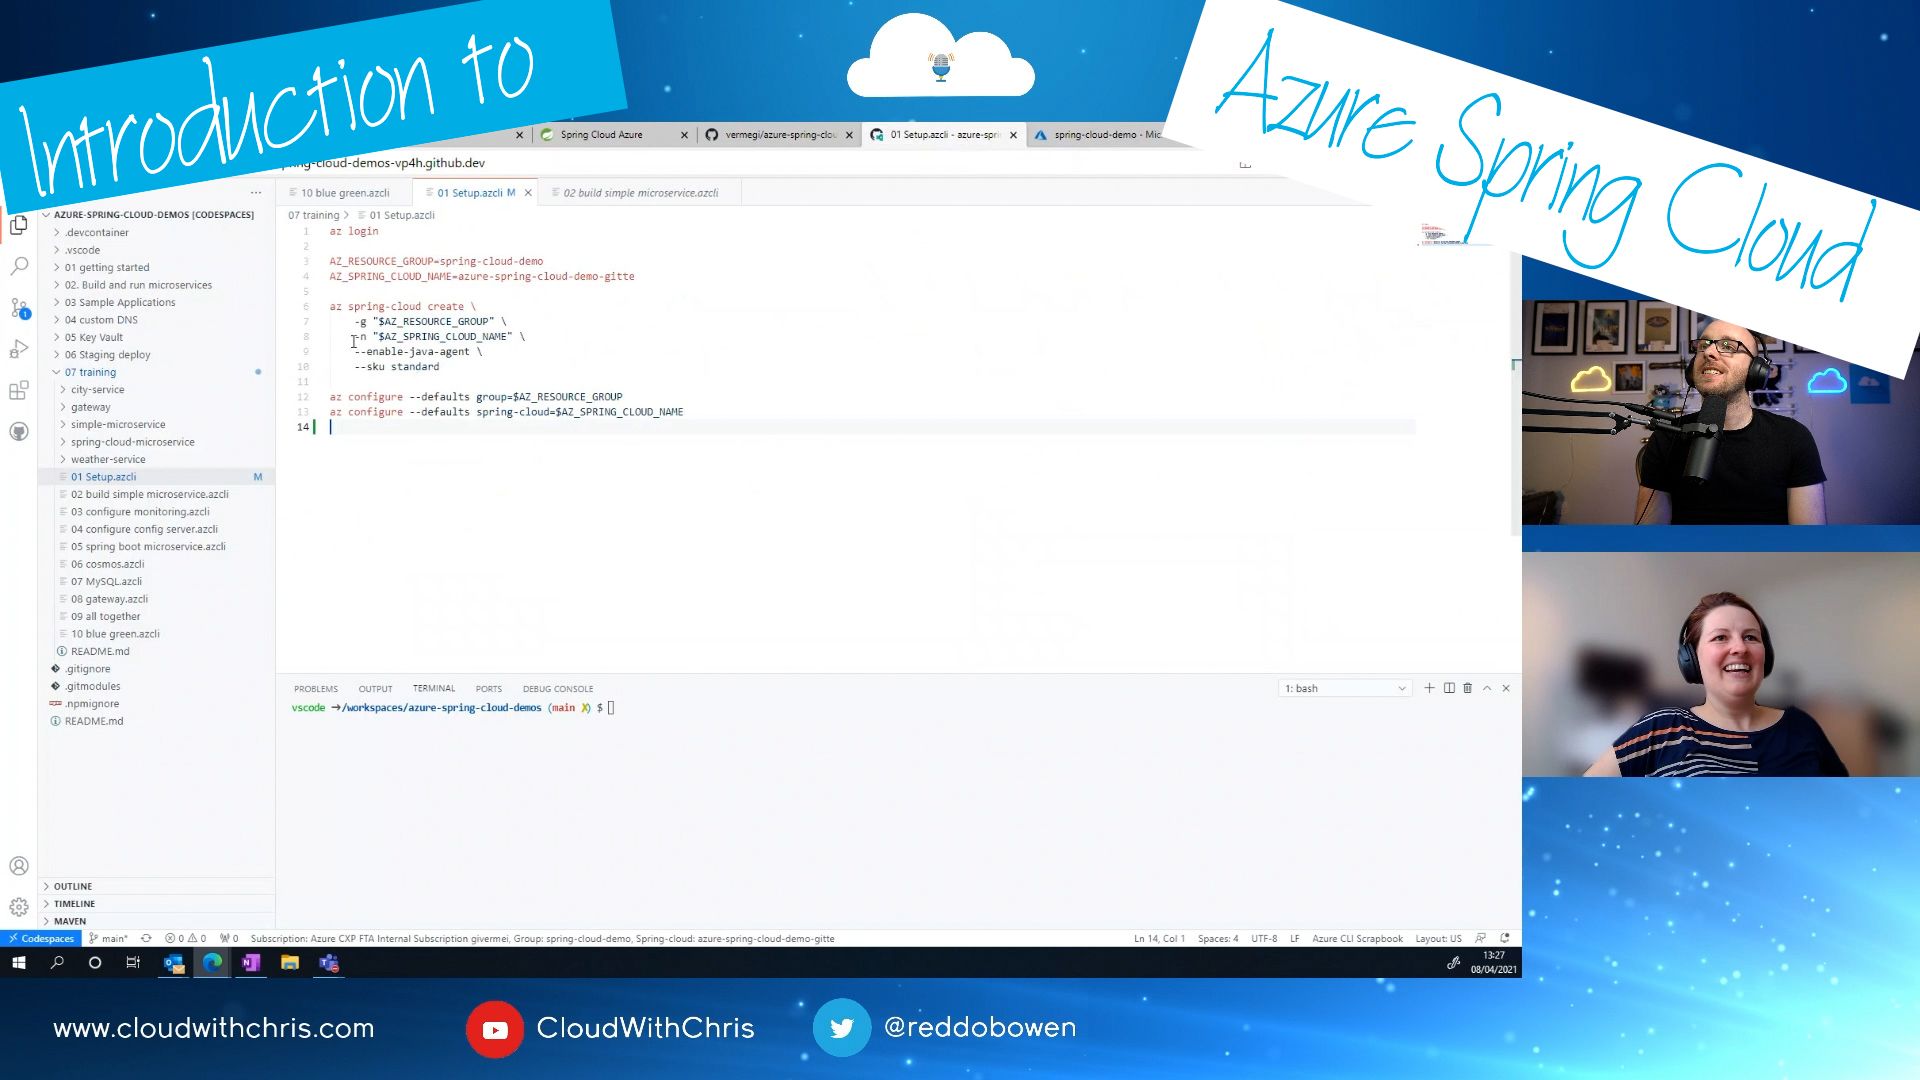 35 - A discussion on Azure Spring Cloud